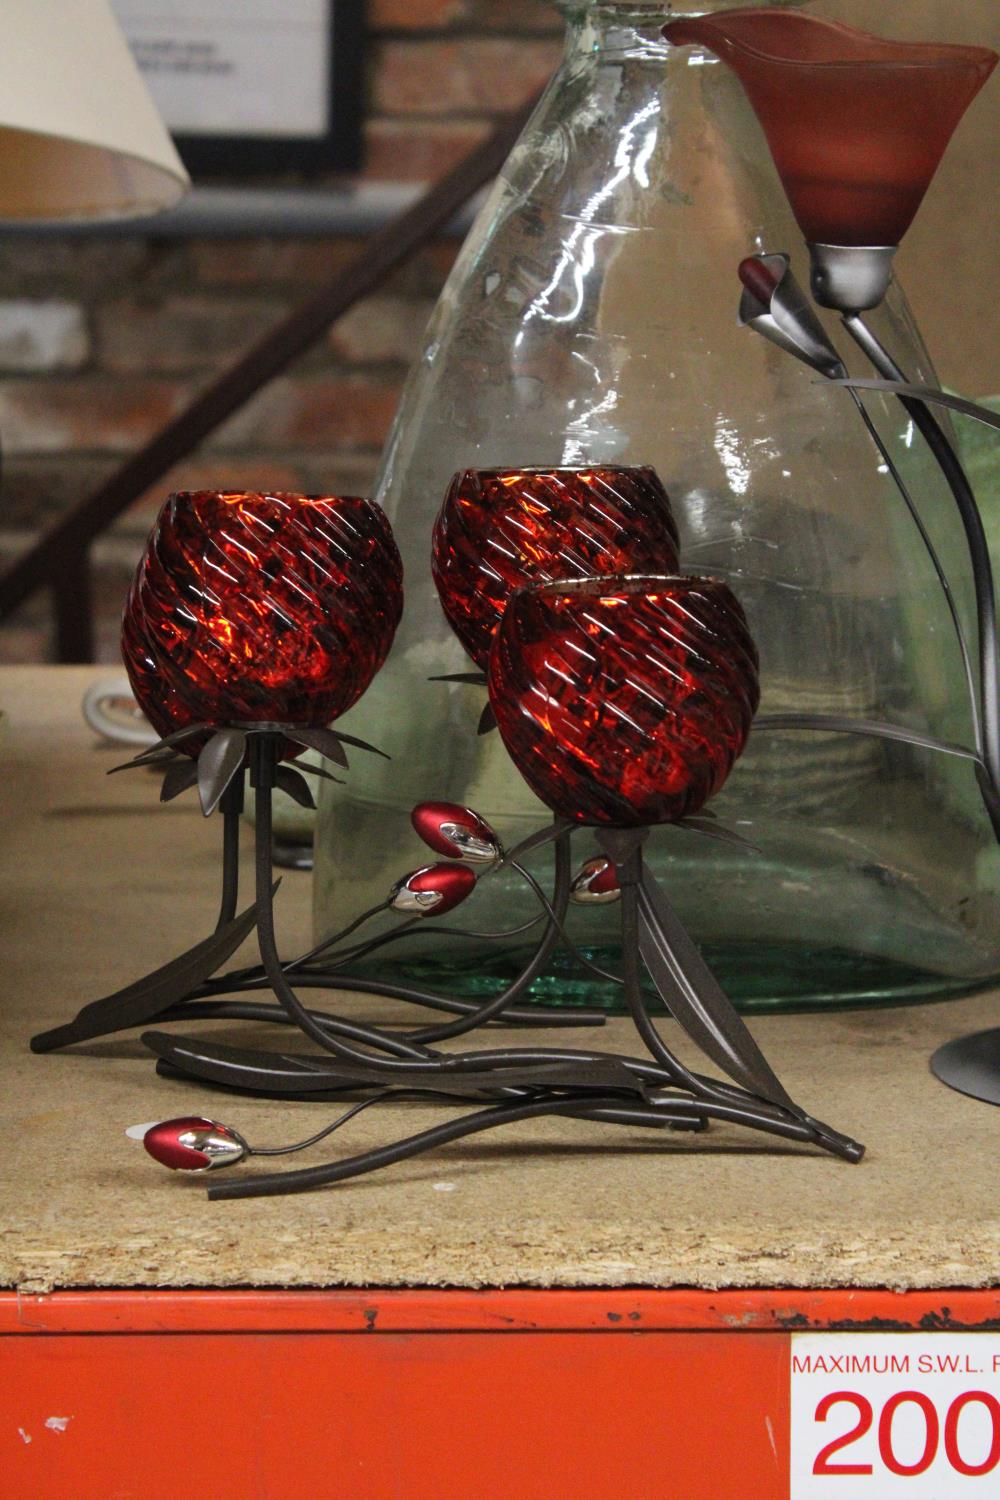 A THREE MODERN GLASS FLOWER DESIGN METAL CANDLE HOLDERS PLUS LARGE GLASS VASE - Image 2 of 4